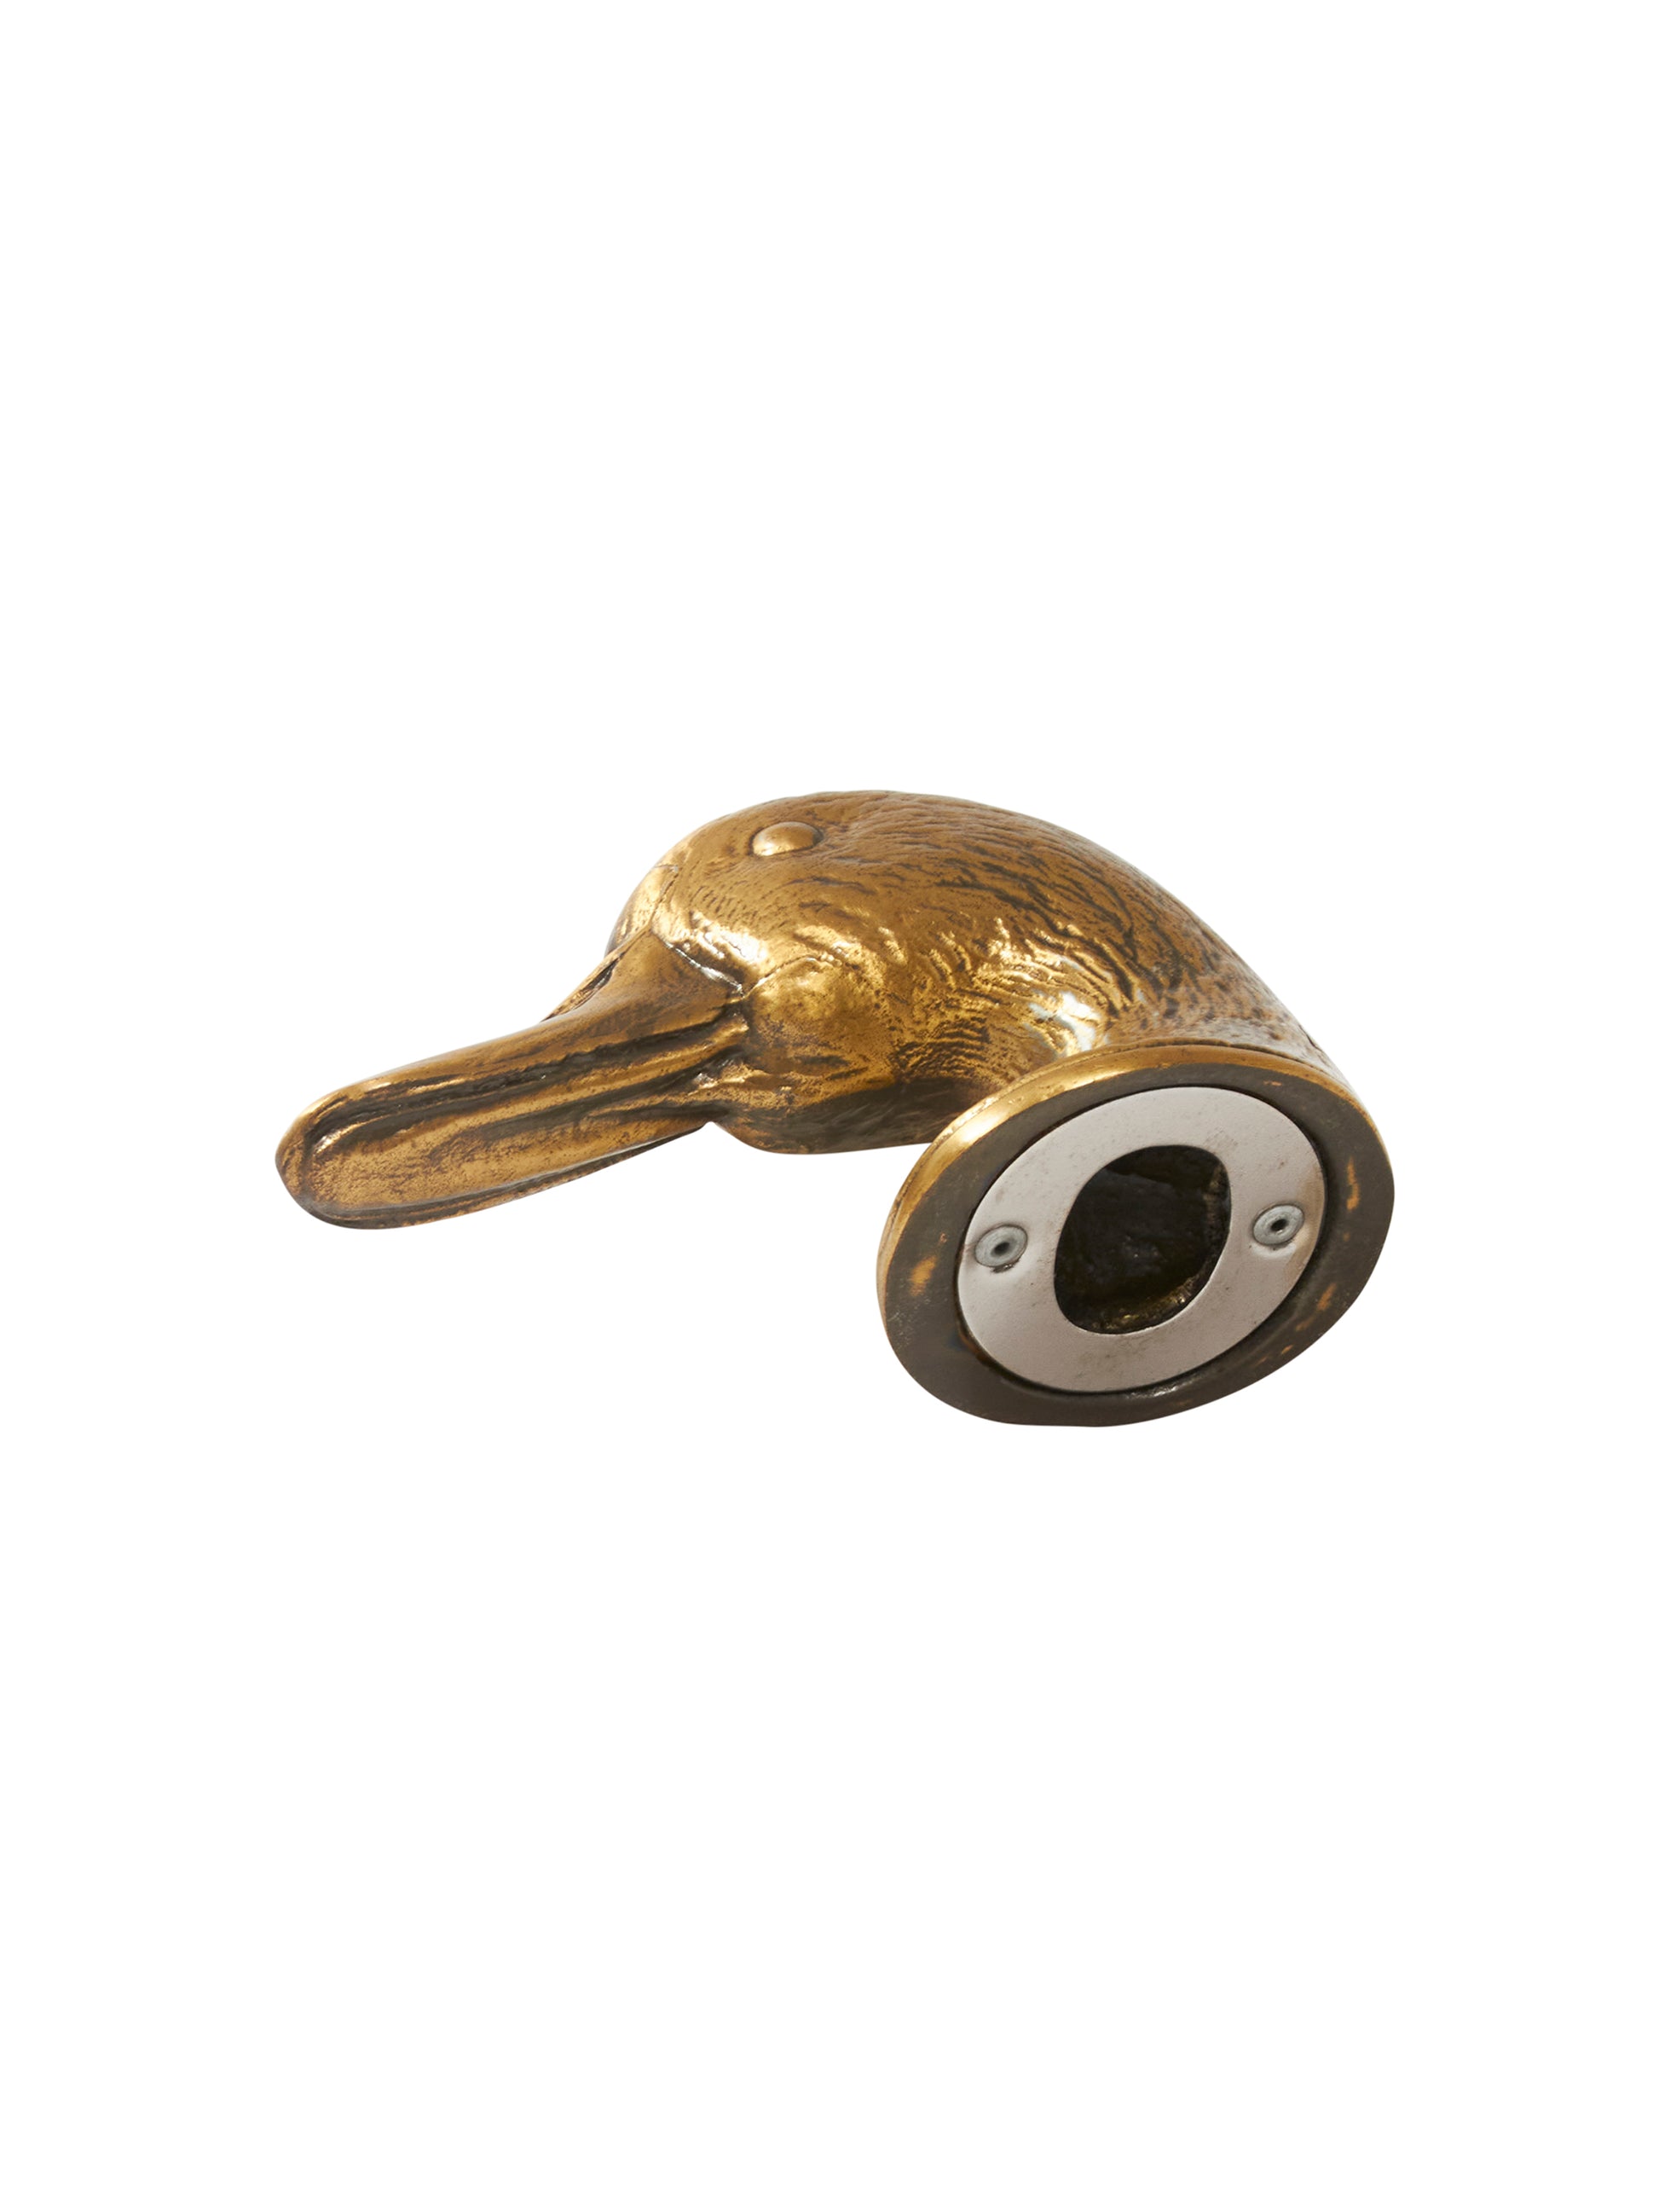 Shop the Vintage Textured Brass Duck Head Bottle Opener at Weston Table